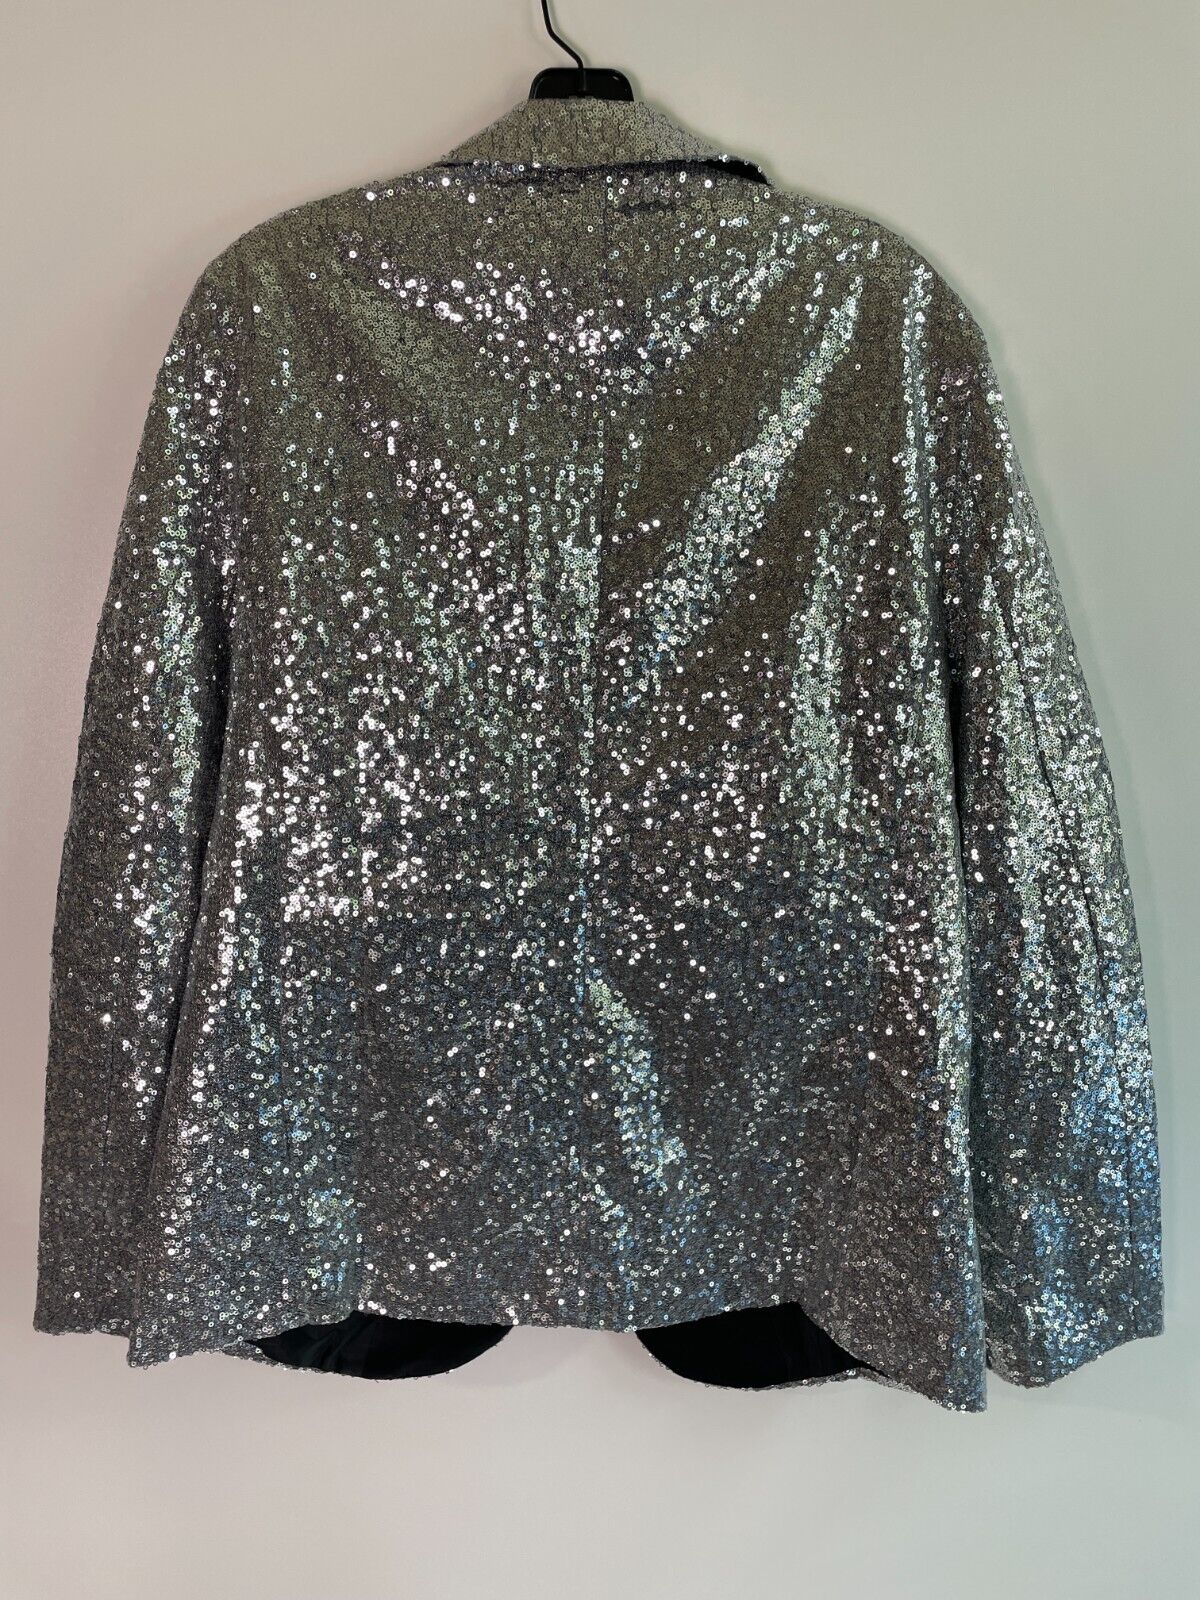 Mens L Sequined Shiny Shimmer One-Button Suit Blazer Jacket Silver Lined The Man